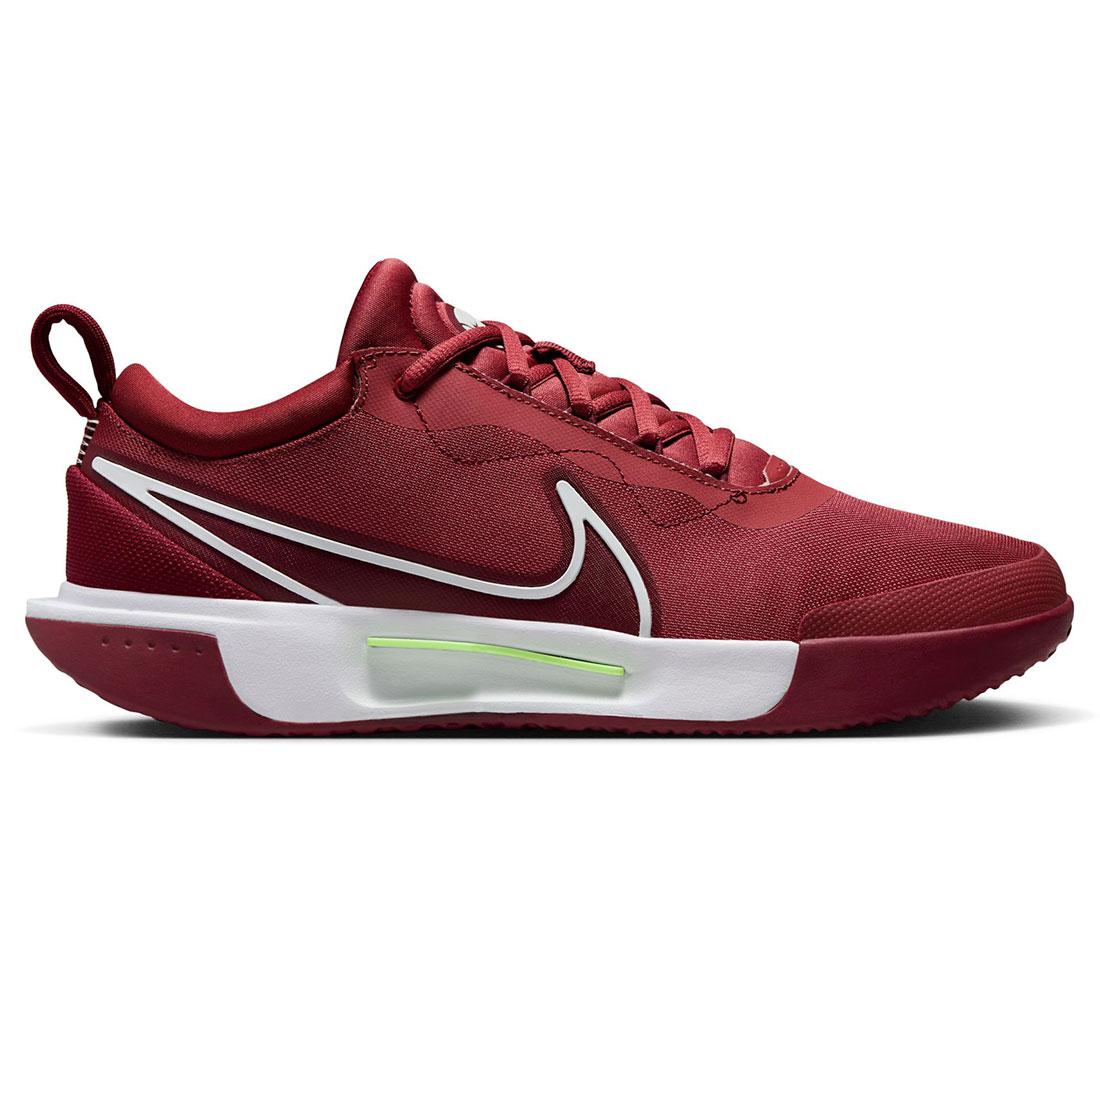 NikeCourt Men`s Zoom Pro Tennis Shoes Cedar and Team Red